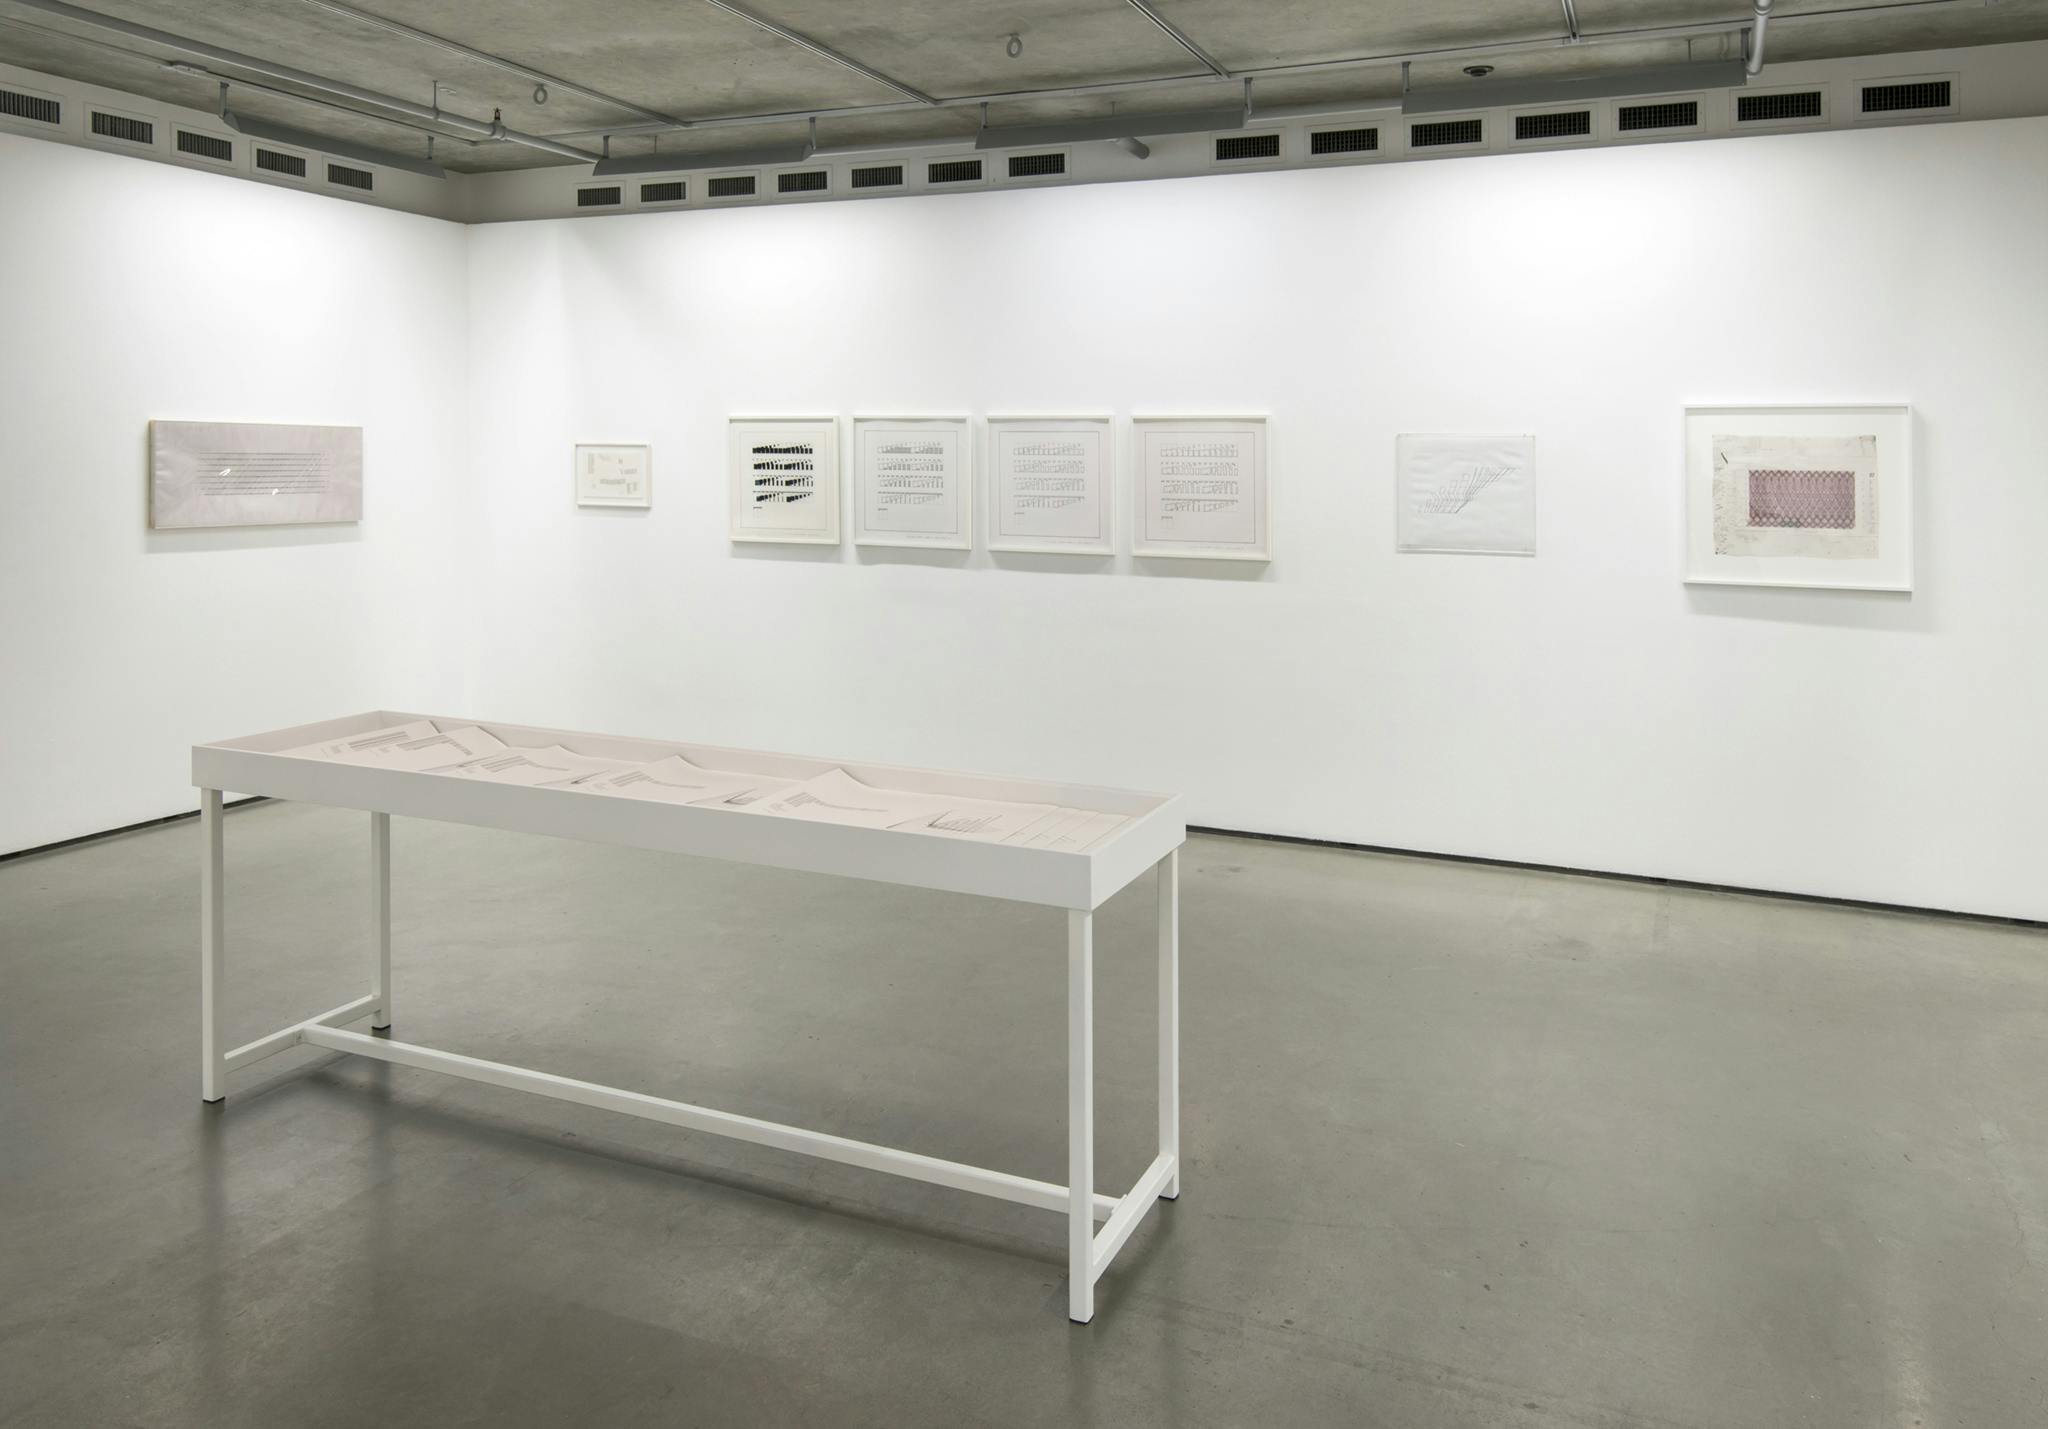 An installation image of Progressions and Rhythms in Eight by Channa Horwitz. Eight framed drawings hang on the white wall of a gallery. A narrow display vitrine with four legs and a glass top sits in front. 